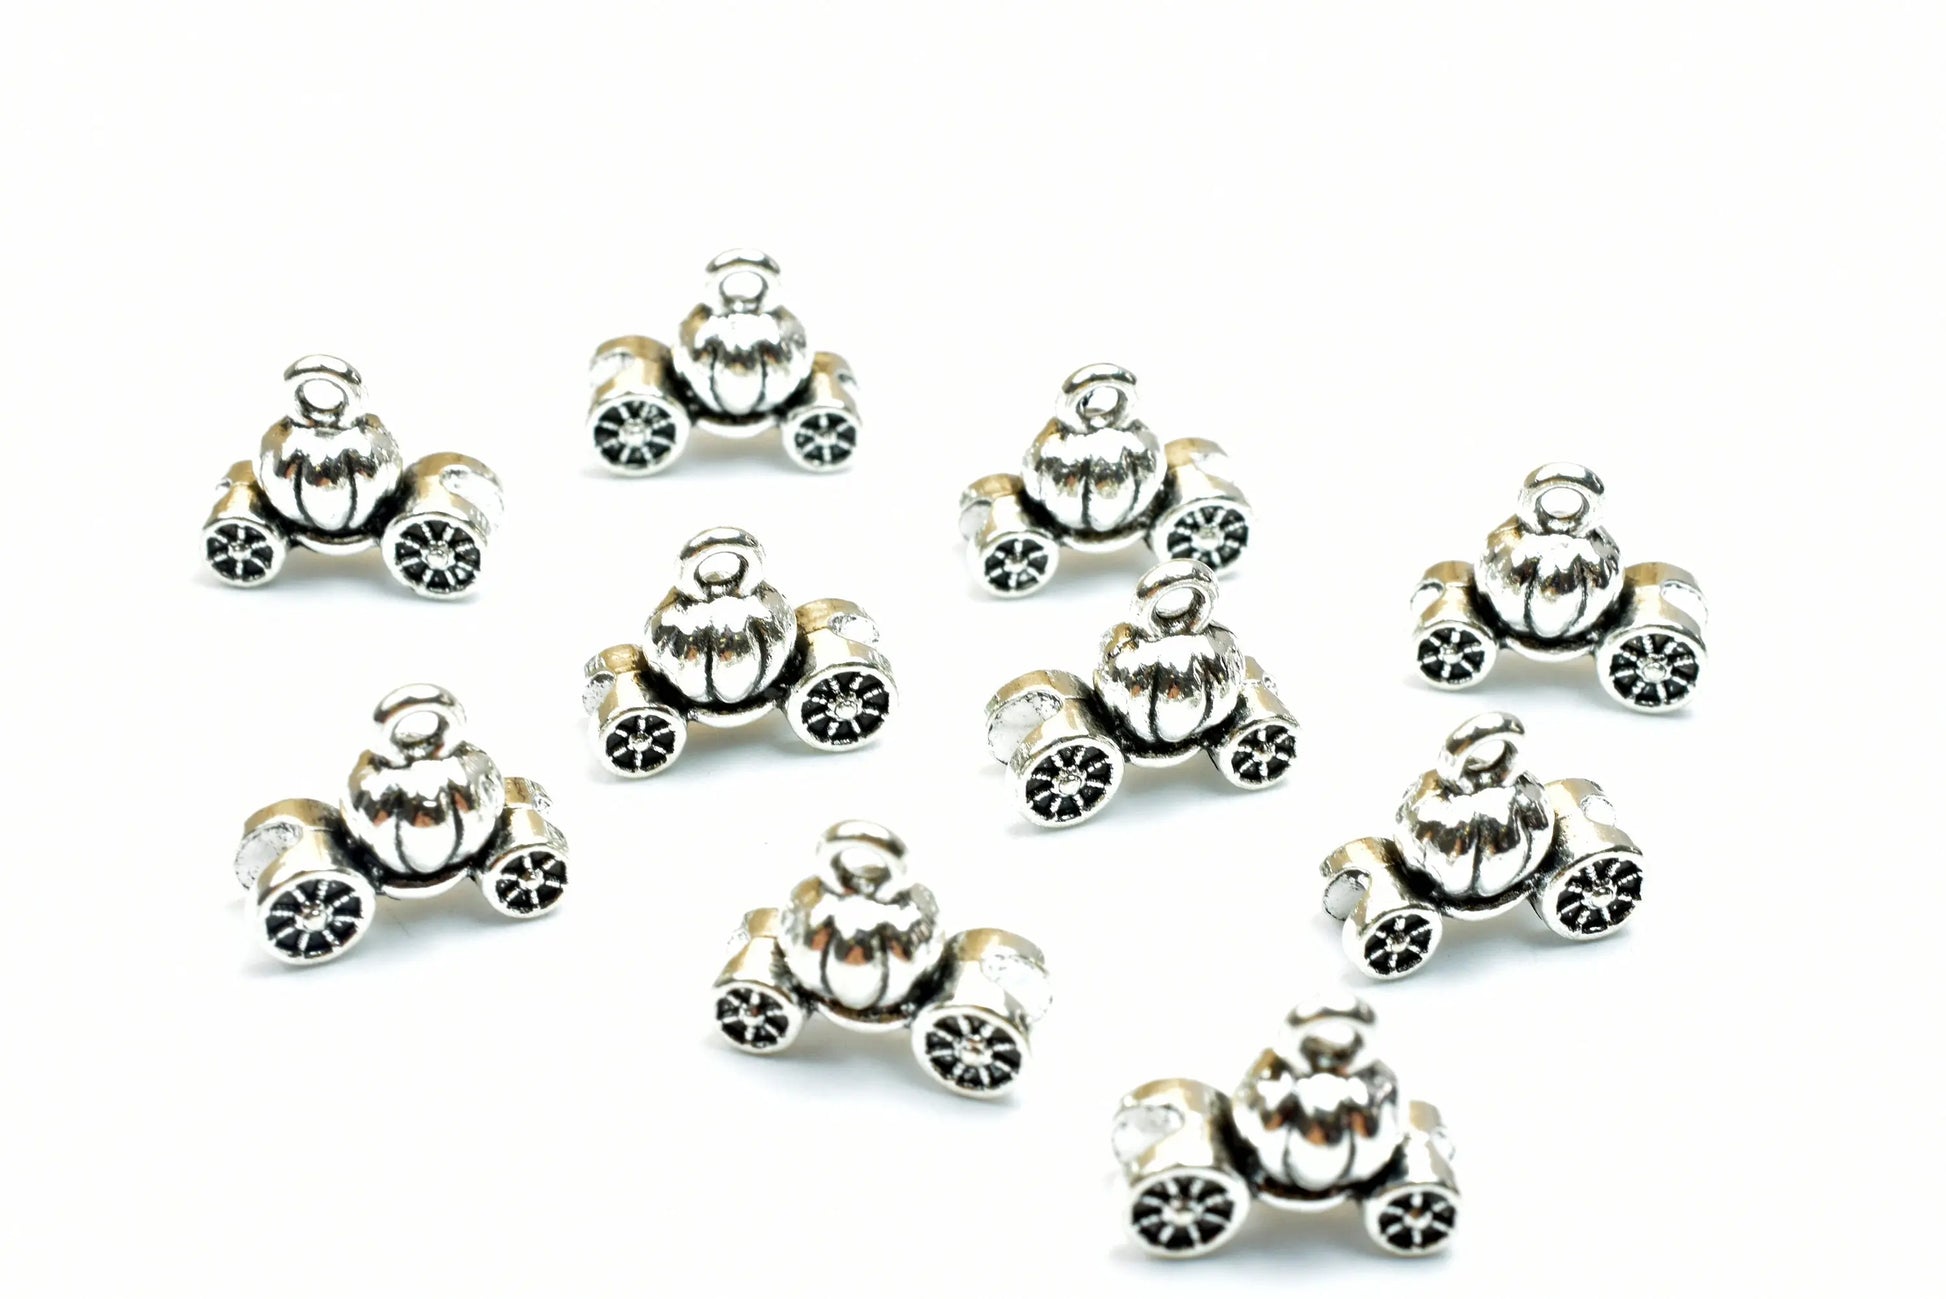 8 PCs Royal Wagon Car Charm Size 12x13mm Silver Color 3D Charm Pendant Finding For Jewelry Making - BeadsFindingDepot